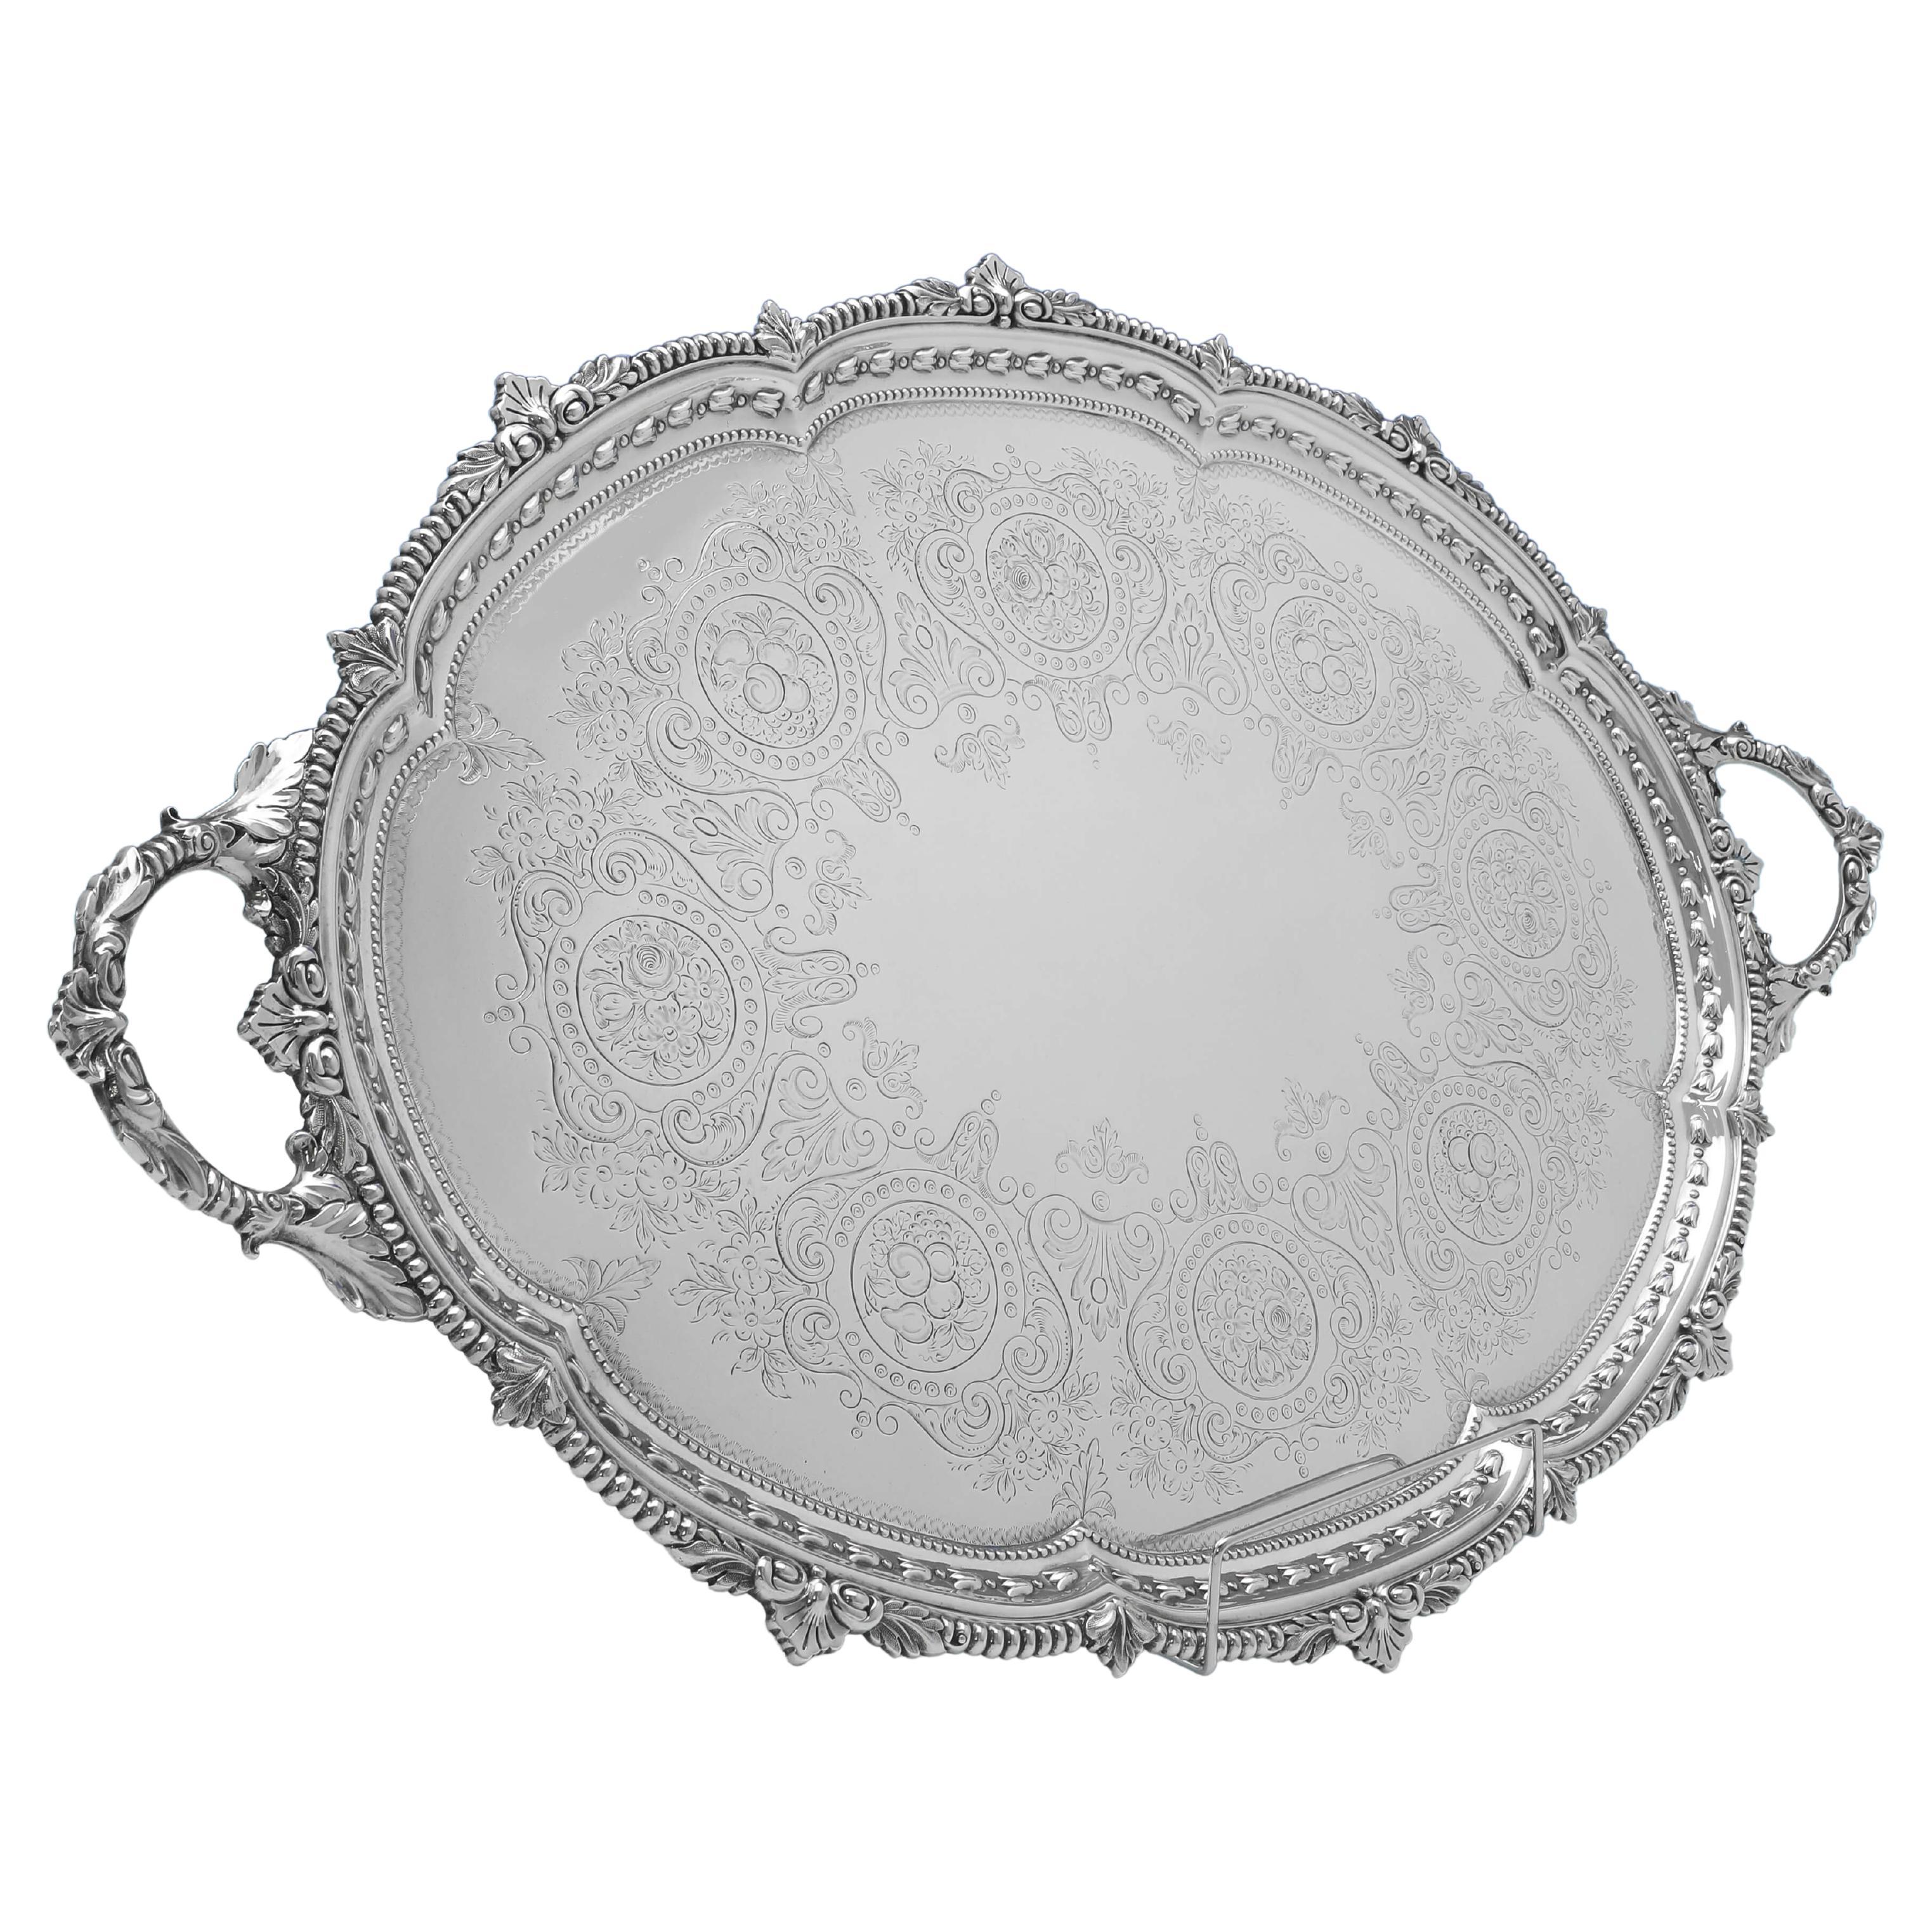 Edwardian Antique Sterling Silver Tray, Mappin Brothers, Sheffield 1902